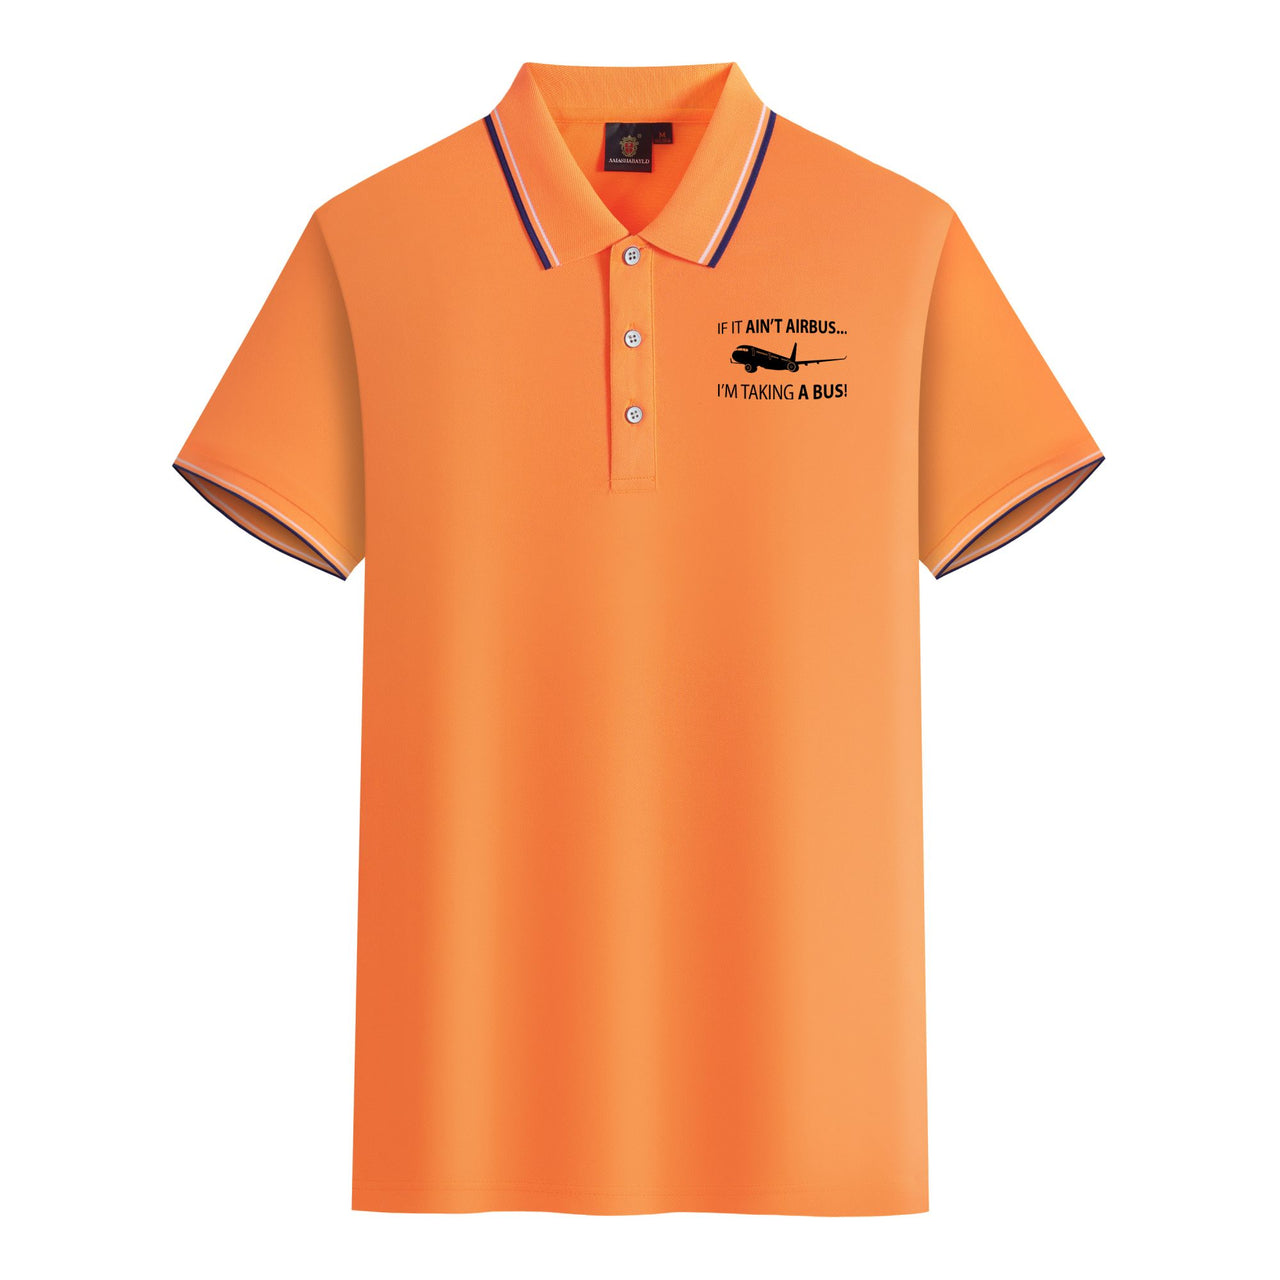 If It Ain't Airbus I'm Taking A Bus Designed Stylish Polo T-Shirts